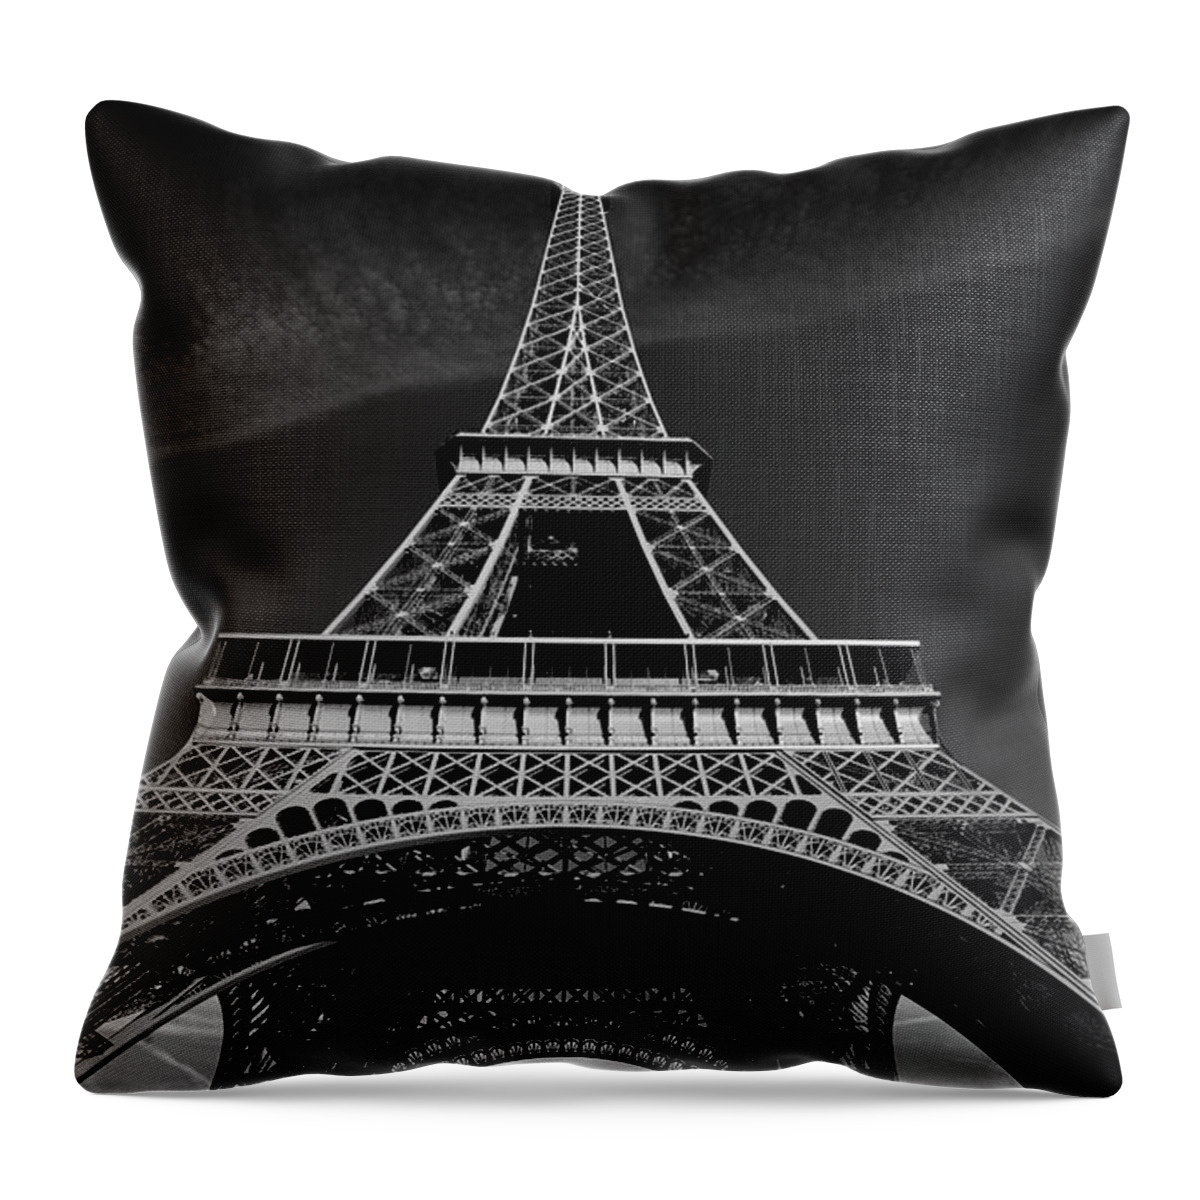 Eiffel Tower Throw Pillow featuring the photograph Eiffel Tower by Busà Photography